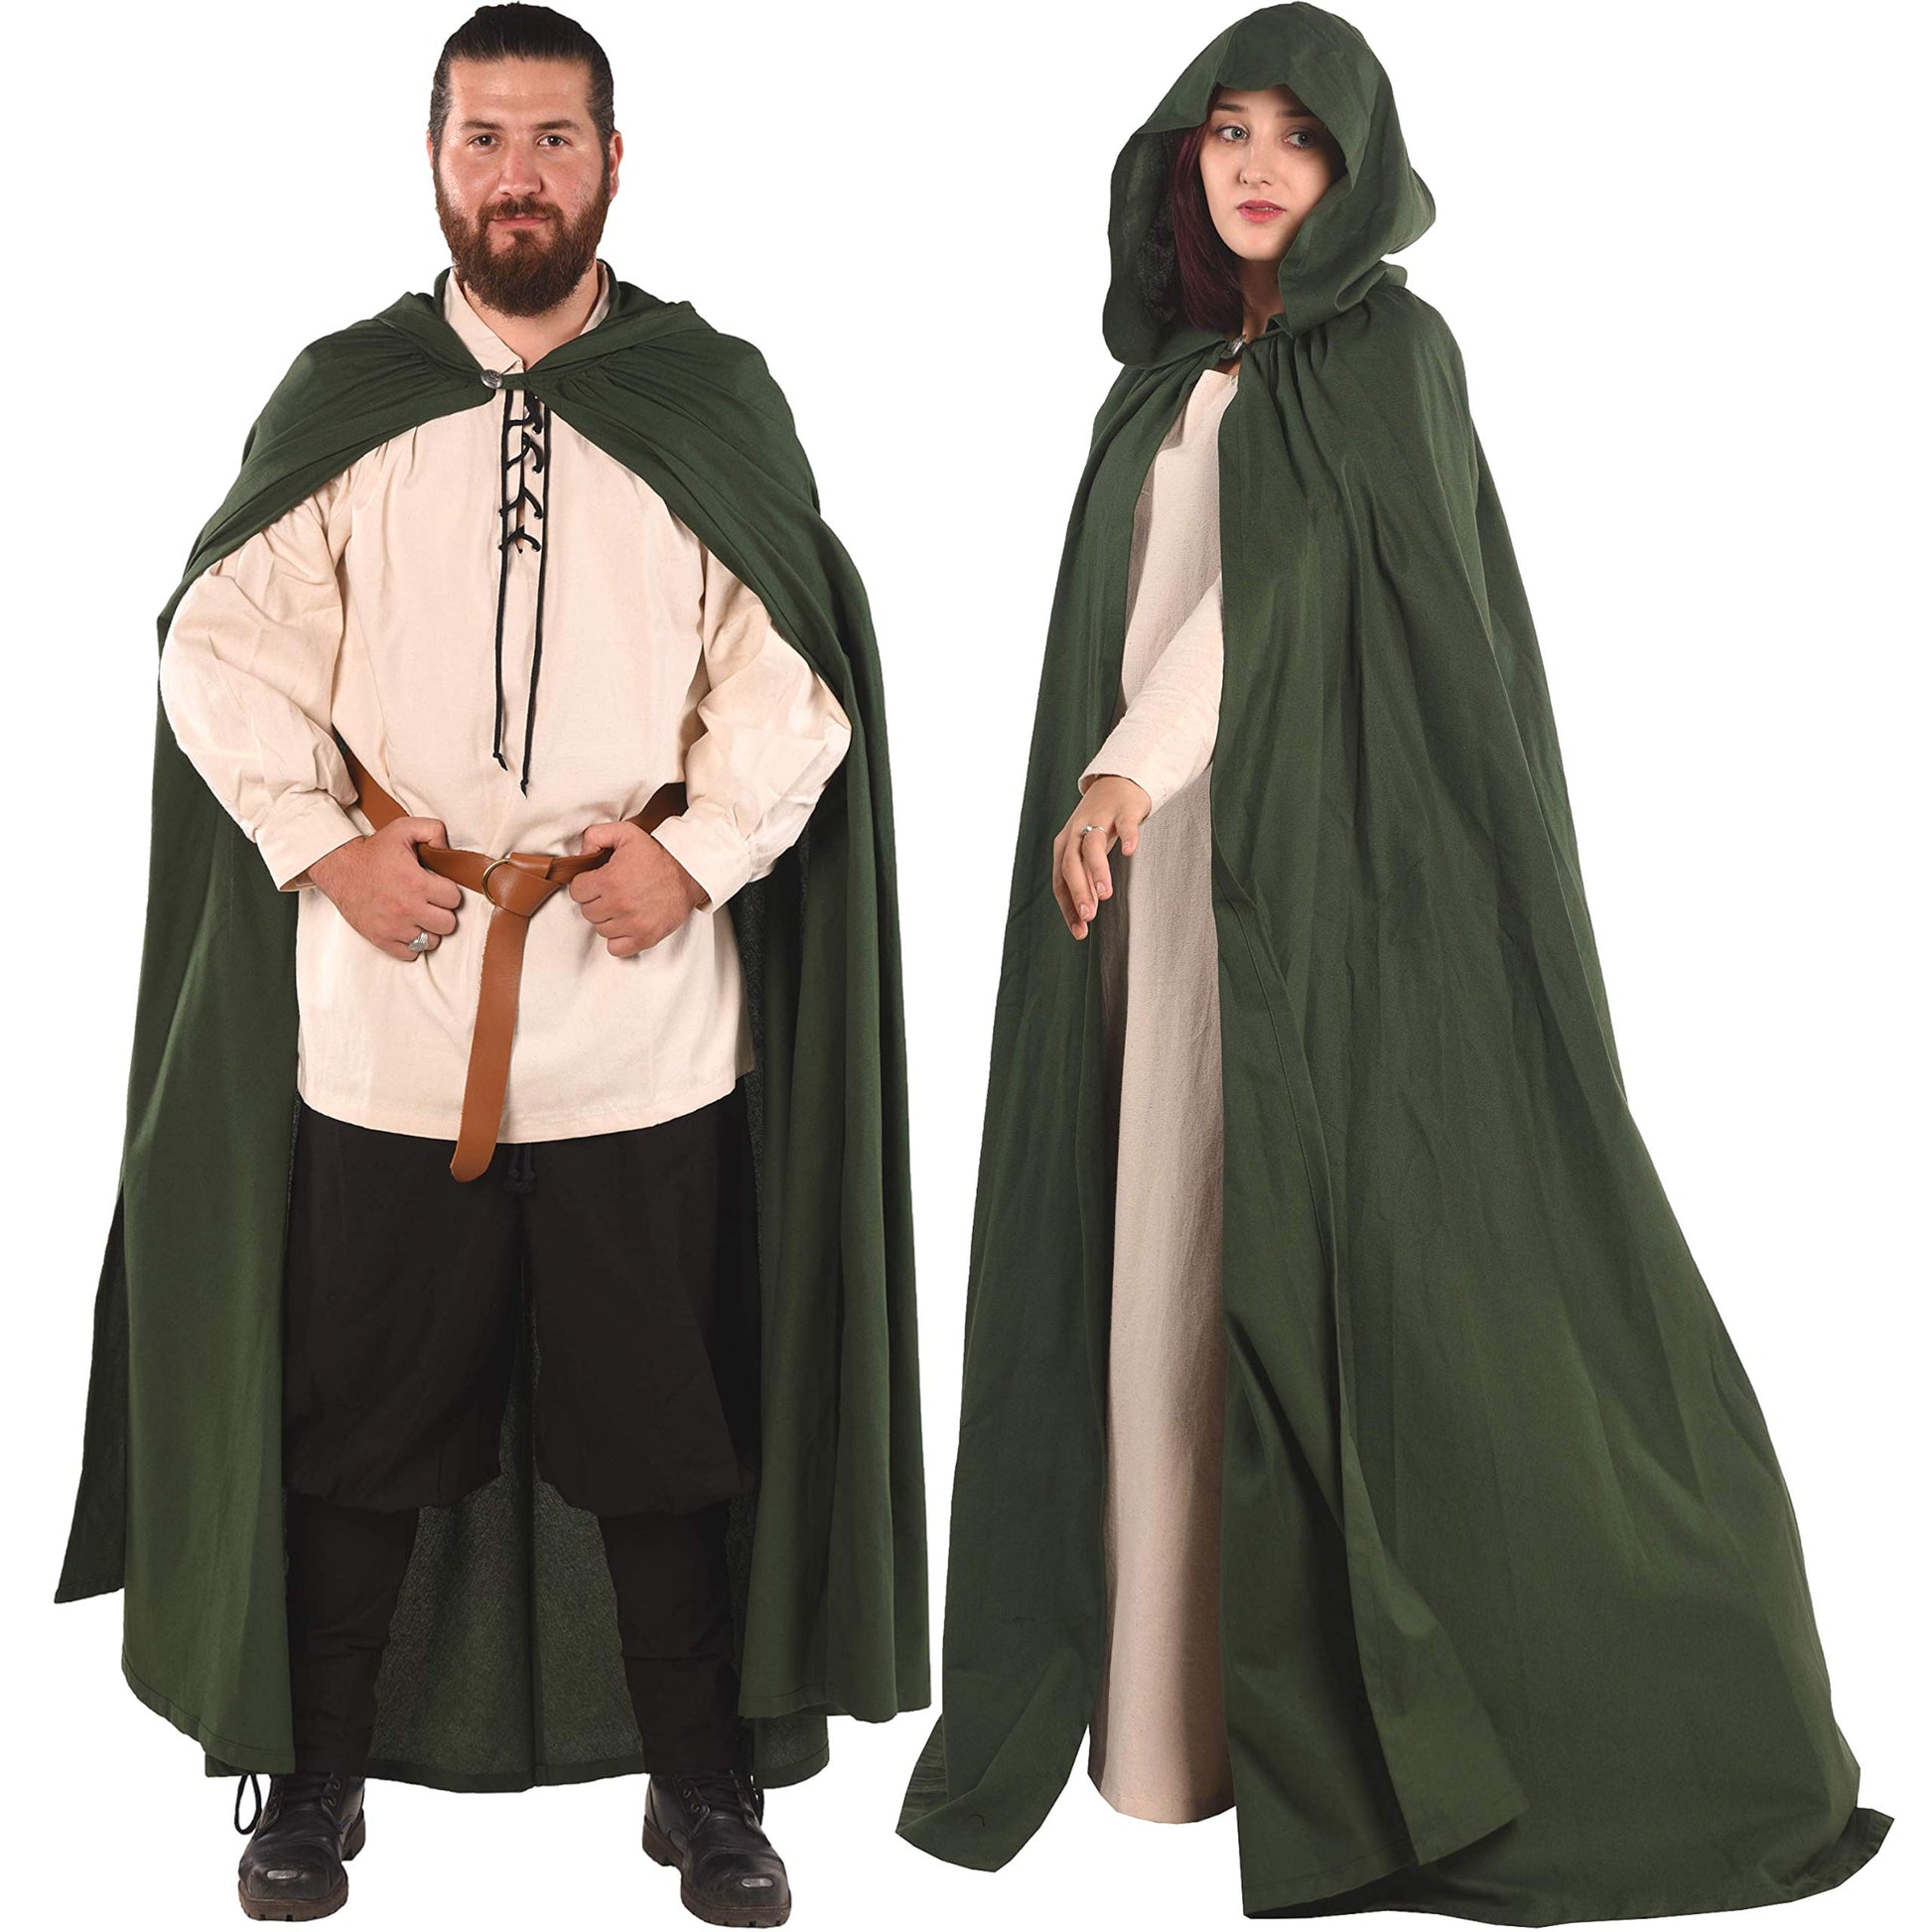 HERO Cotton Medieval Viking Renaissance Hooded COTTON CANVAS Cloak Made in  Turkey by Bycalvina.com 